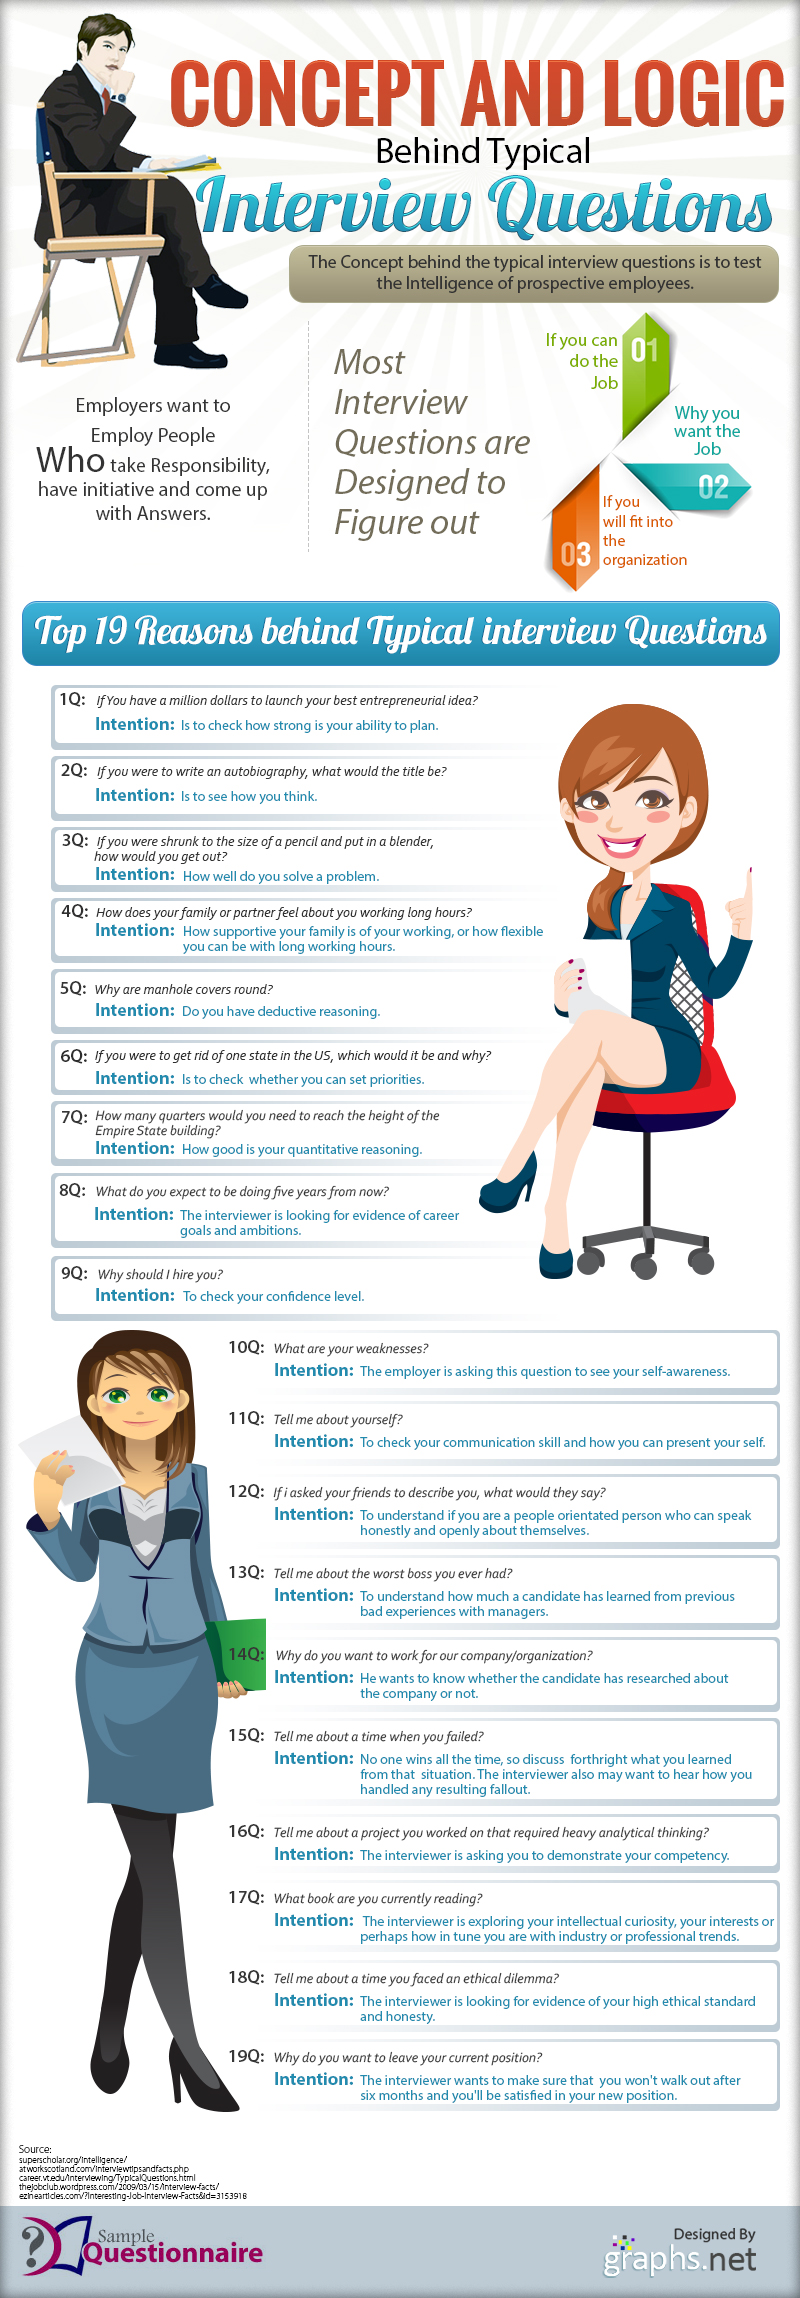 Job Interview Questions and Intentions-Infographic